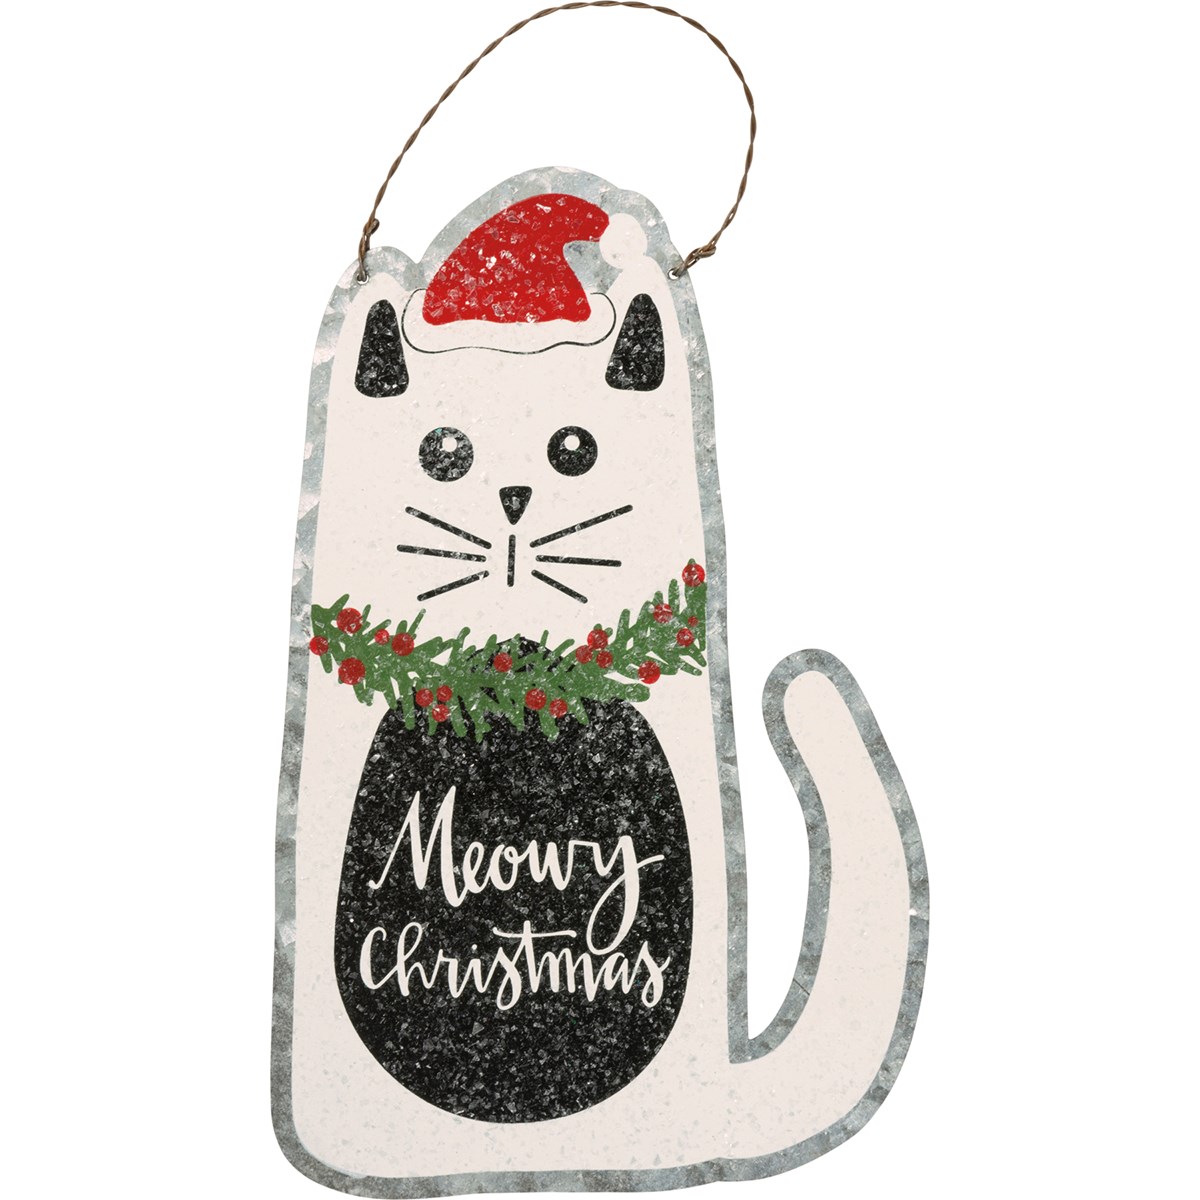 Meowy Christmas Ornament - Metal, Wire, Mica